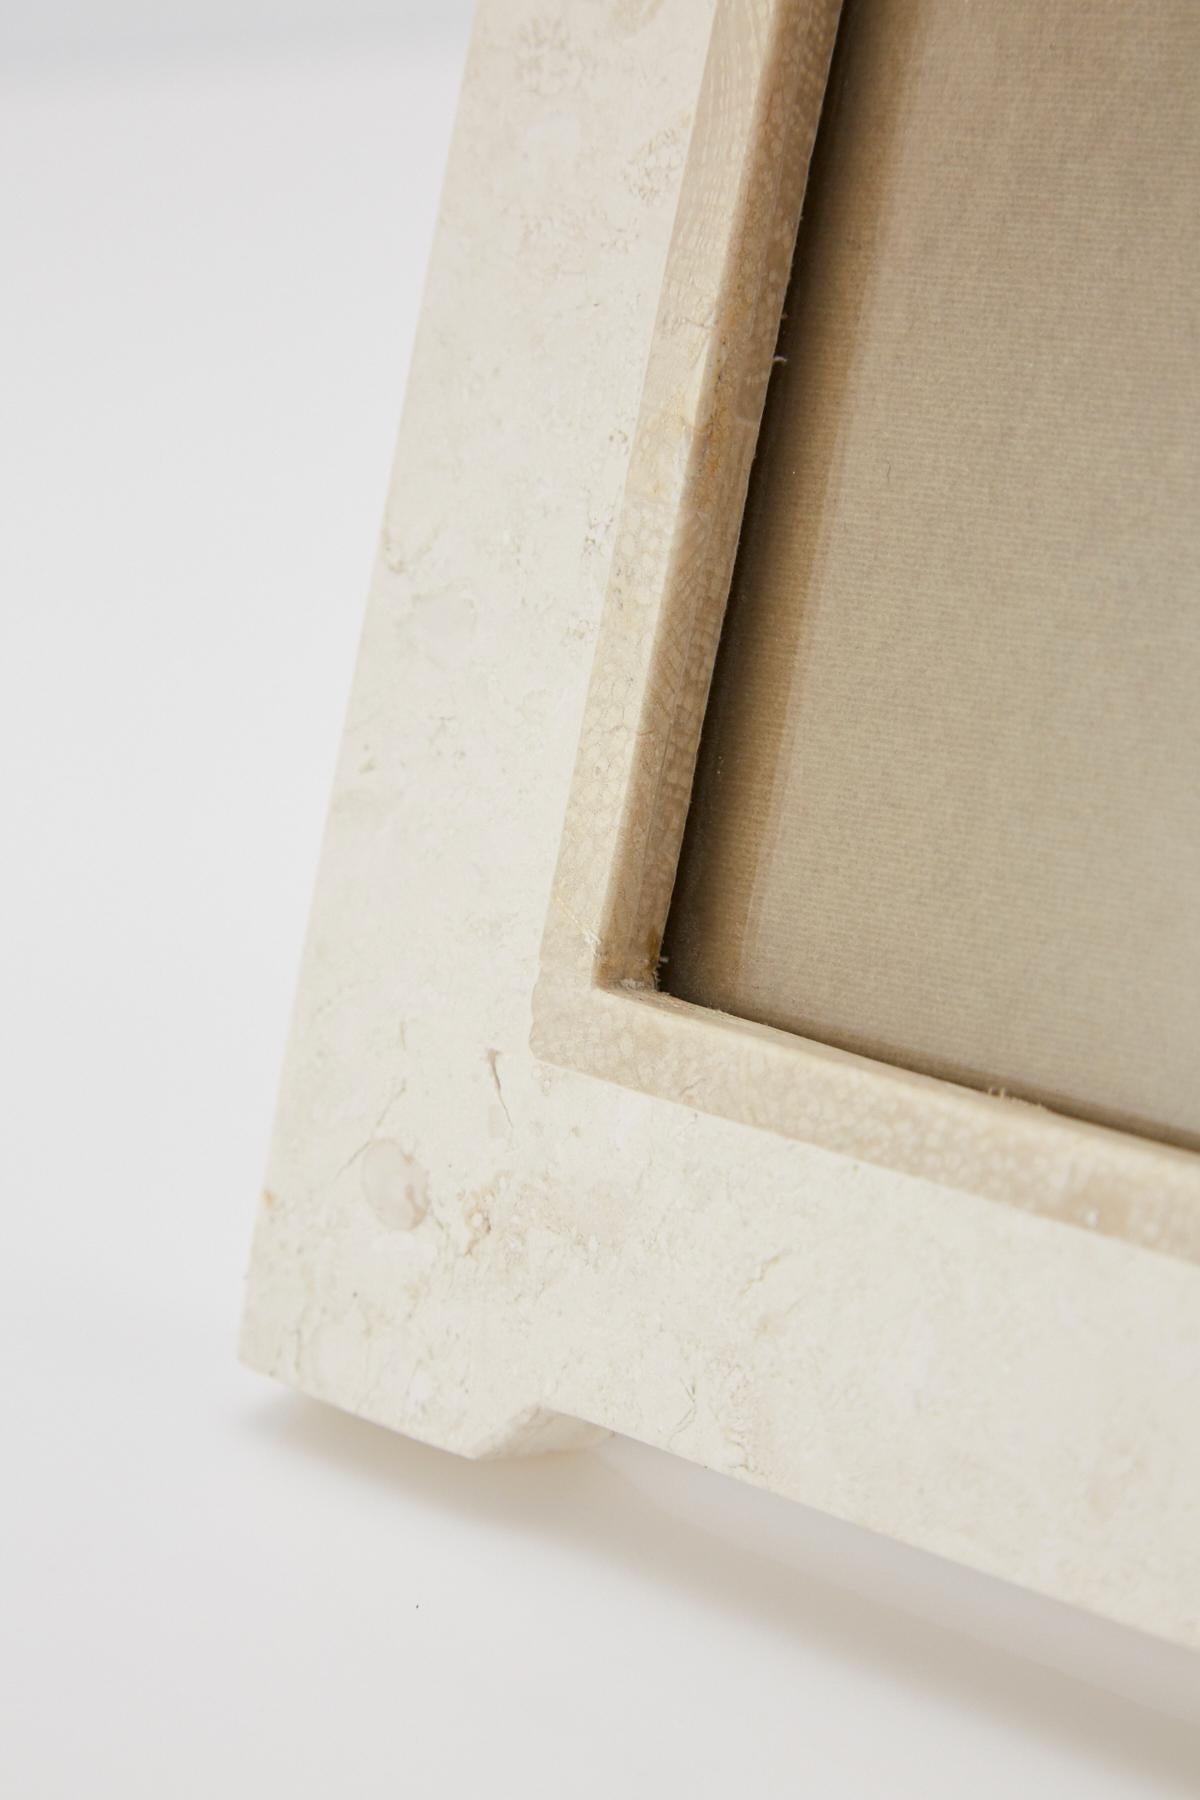 Postmodern White and Beige Arched Tessellated Stone Picture Frame, 1990s (Ende des 20. Jahrhunderts) im Angebot